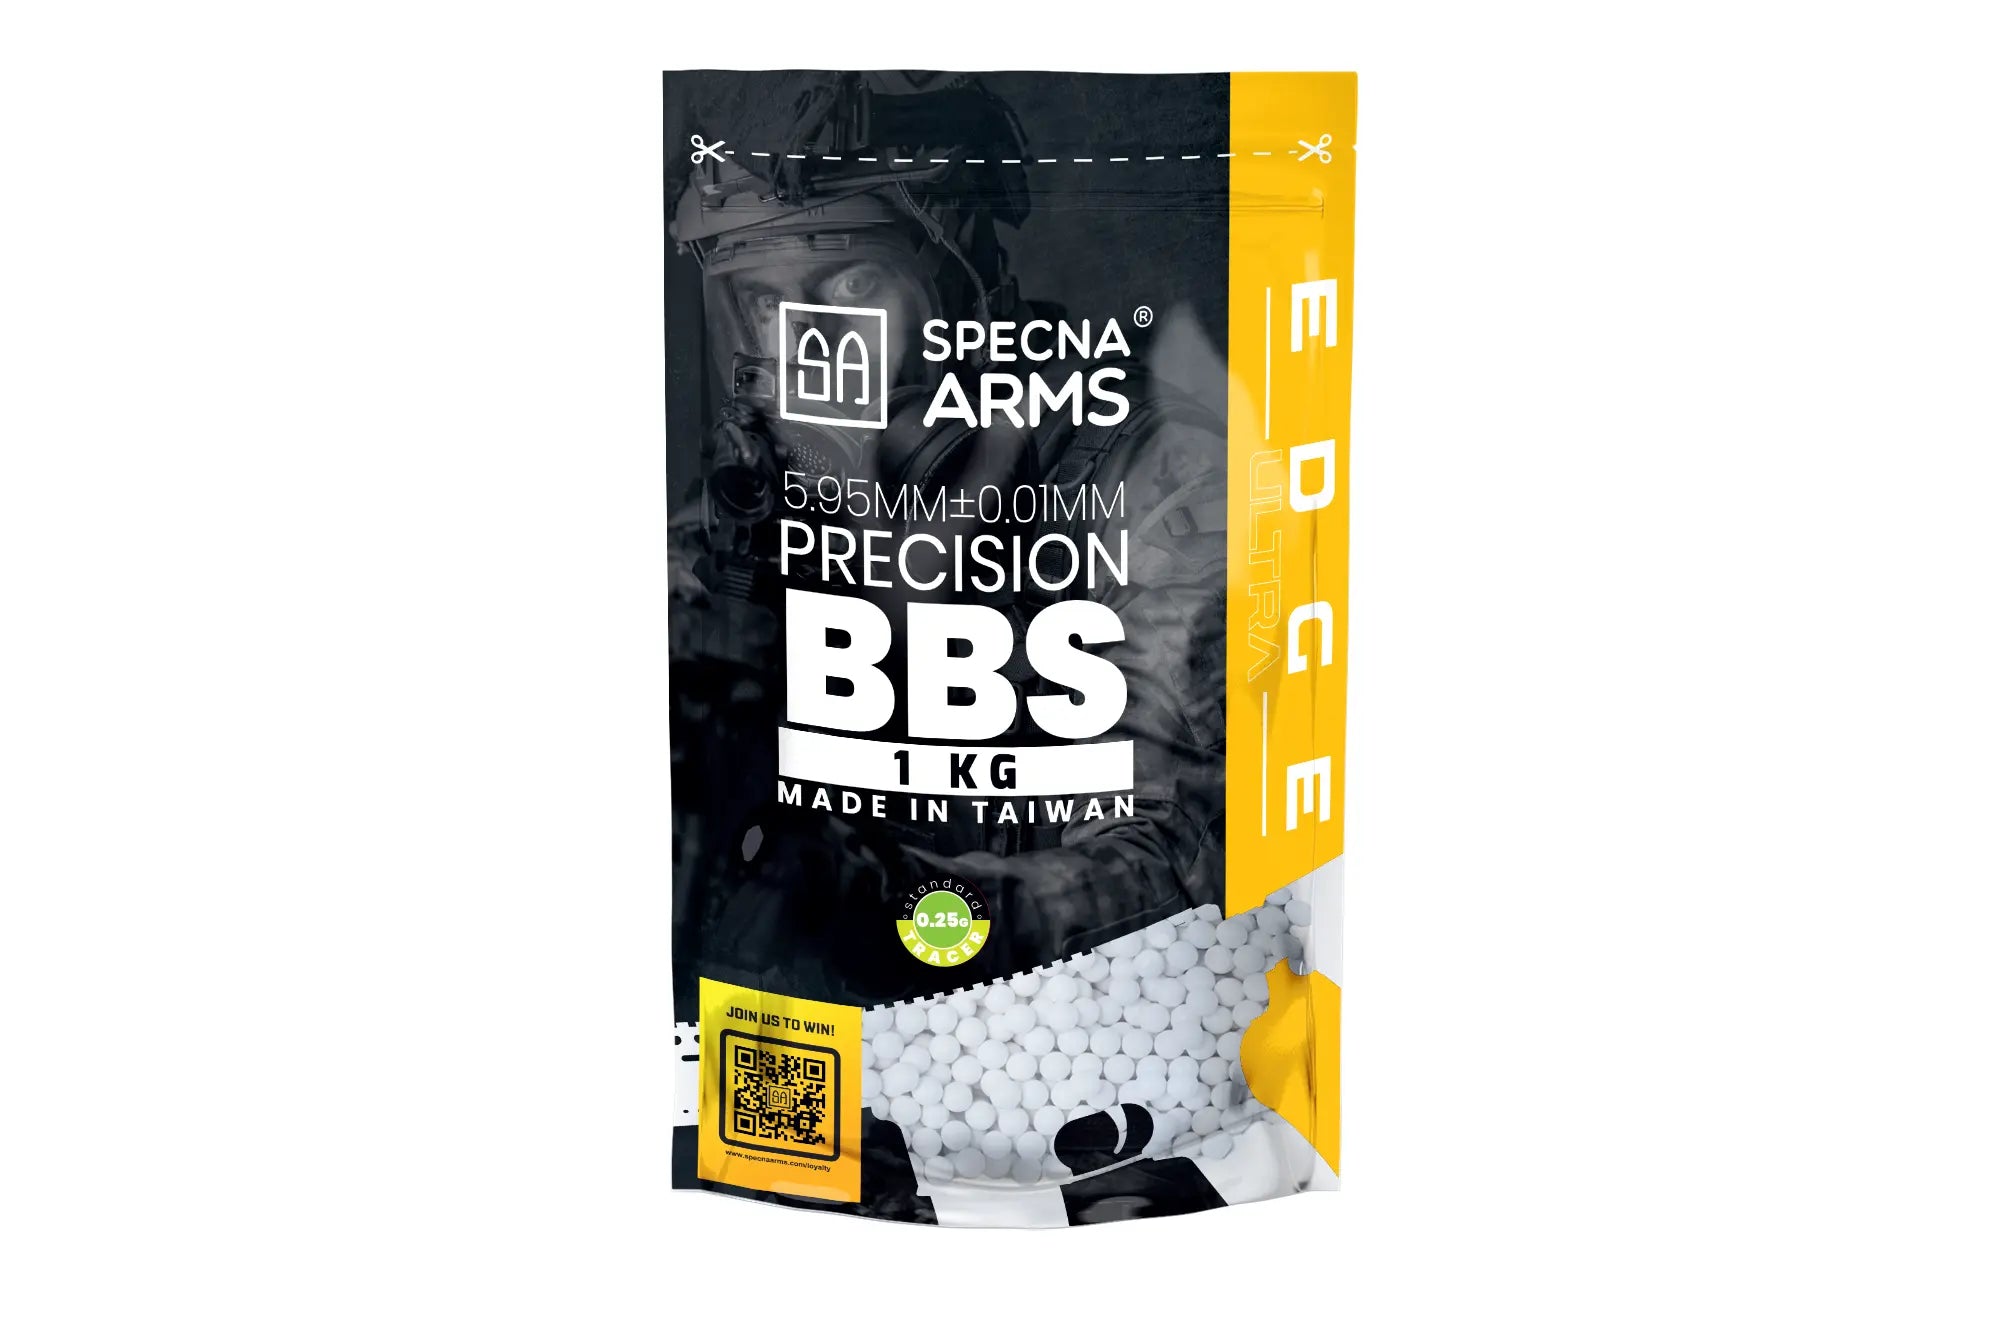 Tracer 0.25g Specna Arms EDGE ULTRA™ precision bullets - 1 kg - green